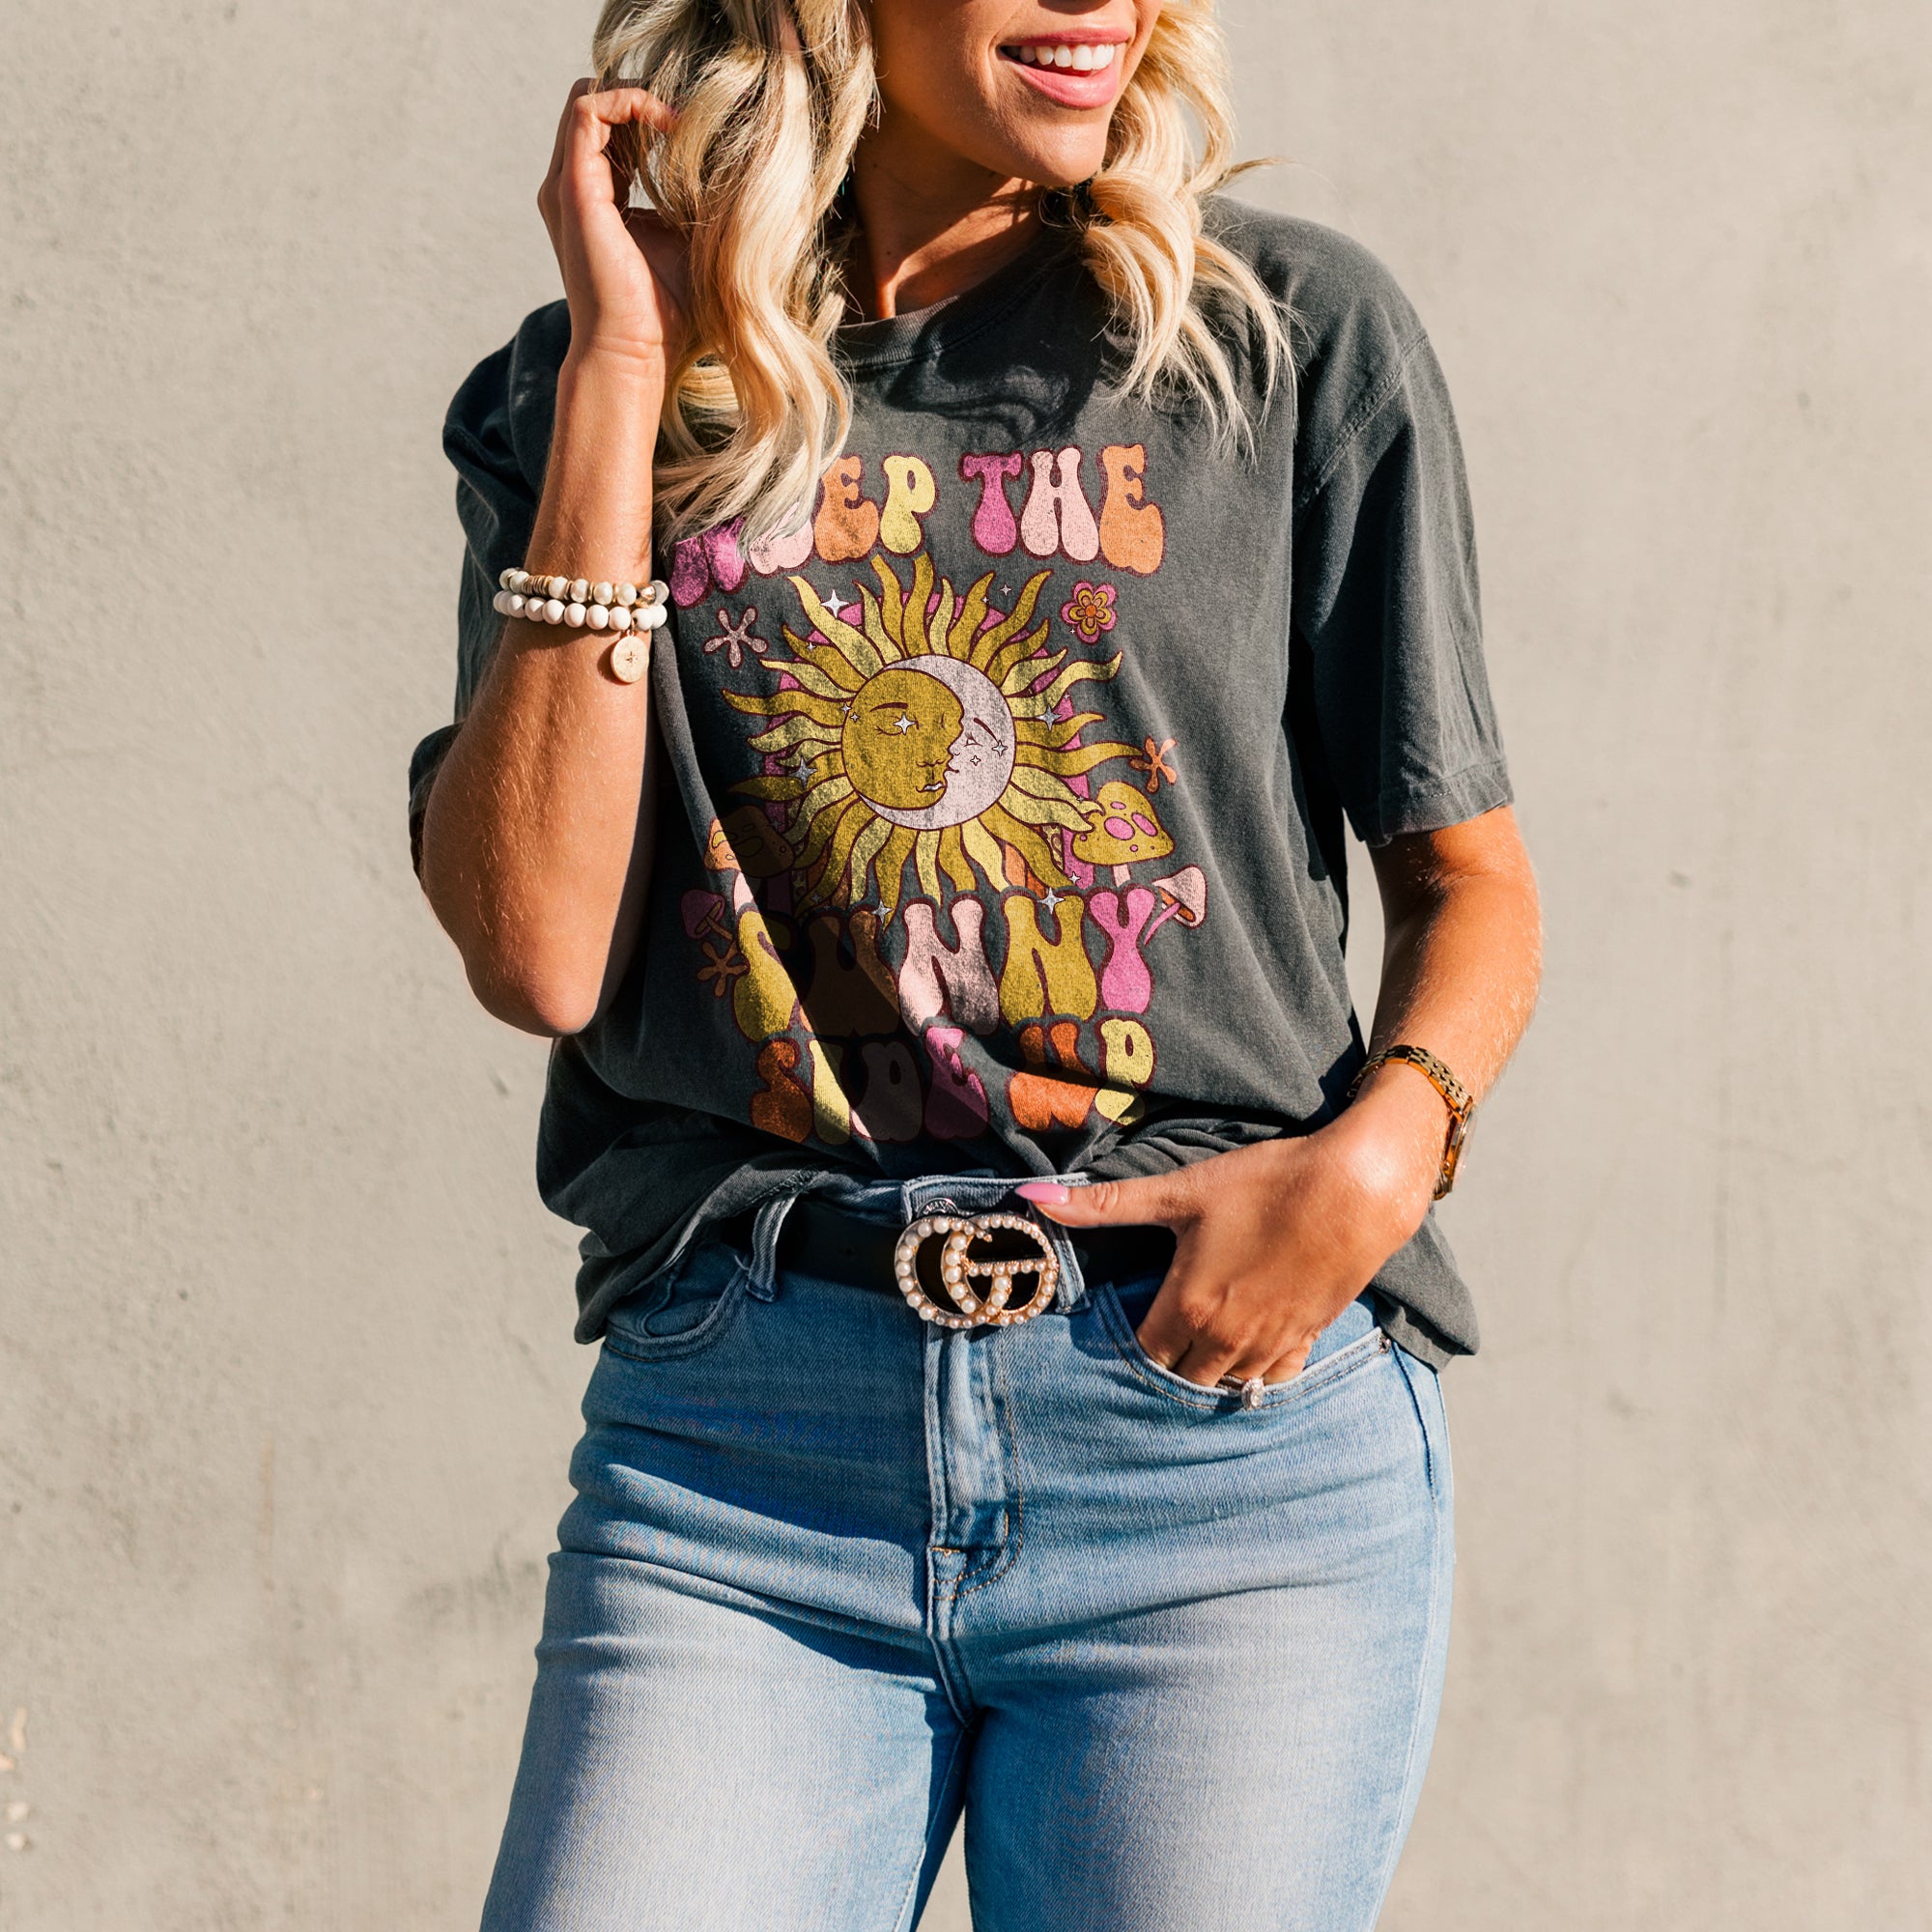 Keep the Sunny Side Up Oversized Shirt Garment-Dyed Graphic Tee